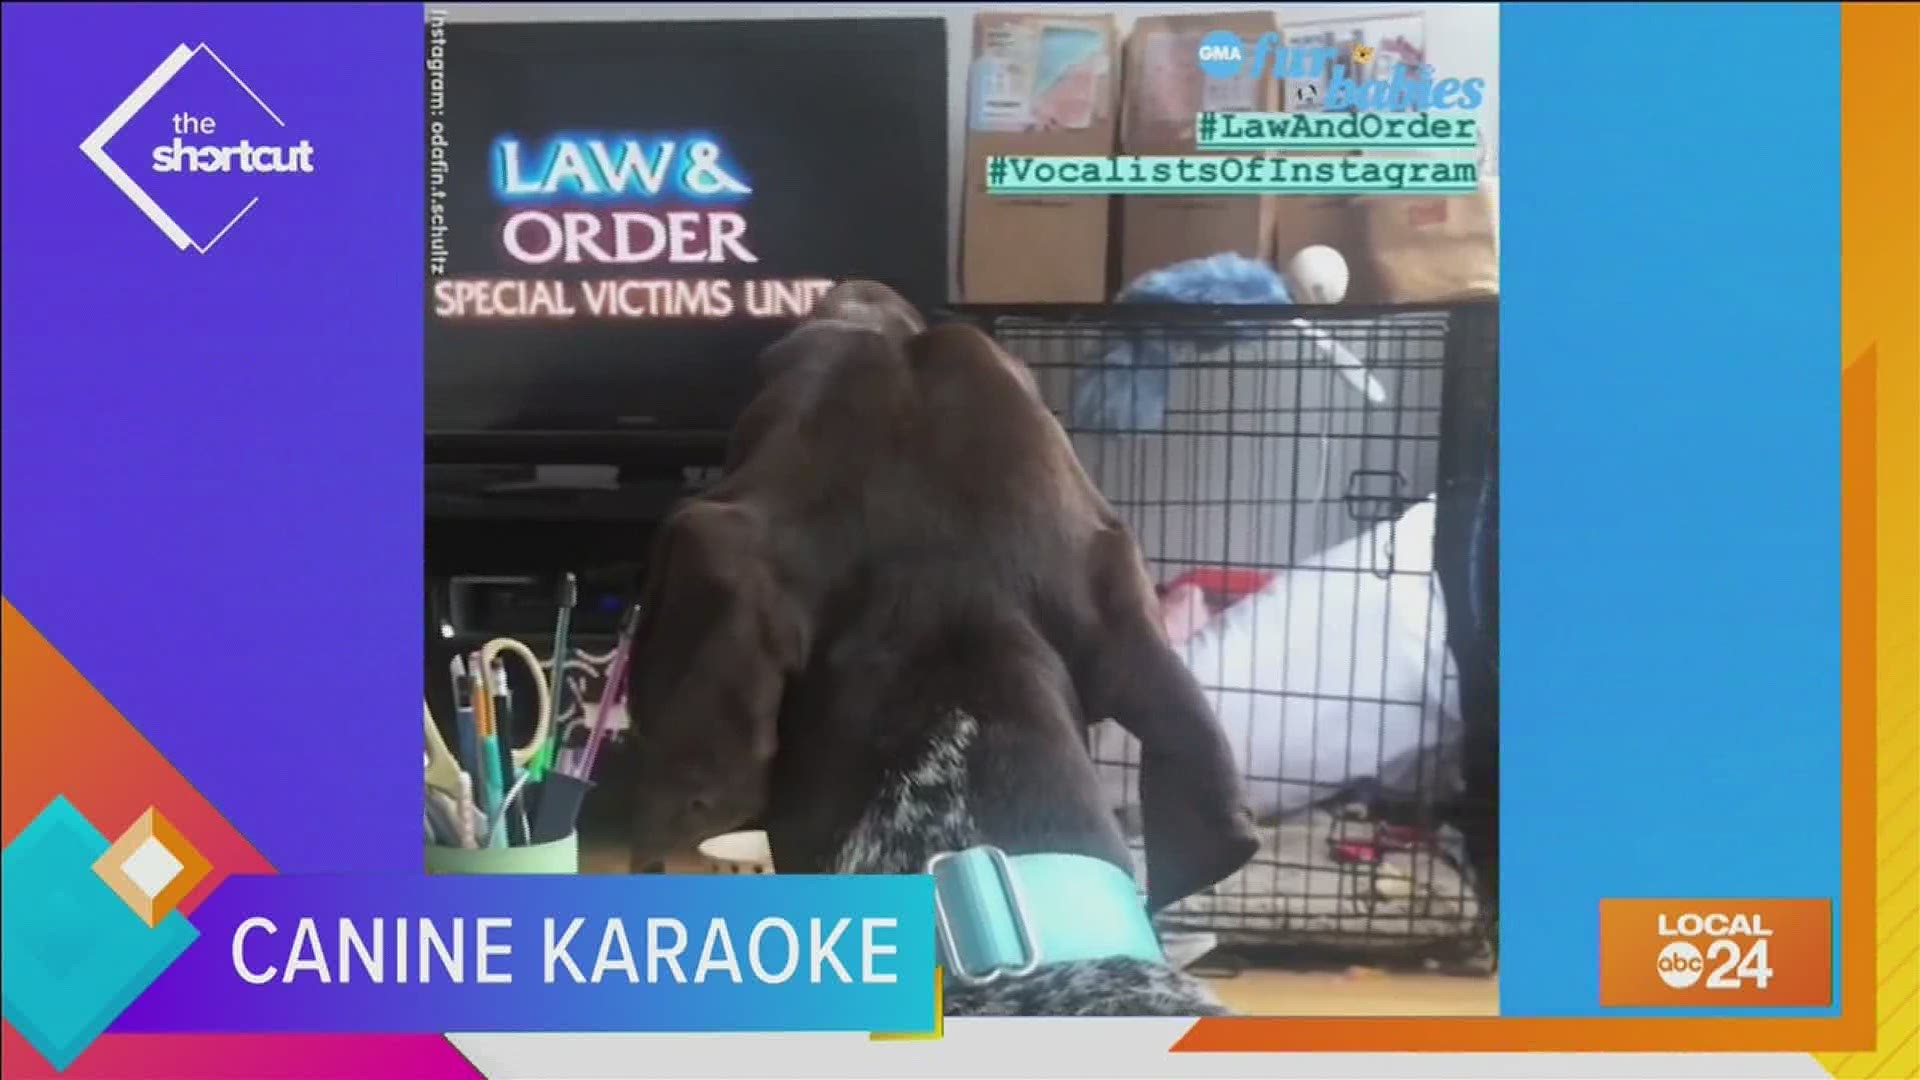 Join Sydney Neely and her new-found canine pal on this week's "The Shortcut" for Canine karaoke time!